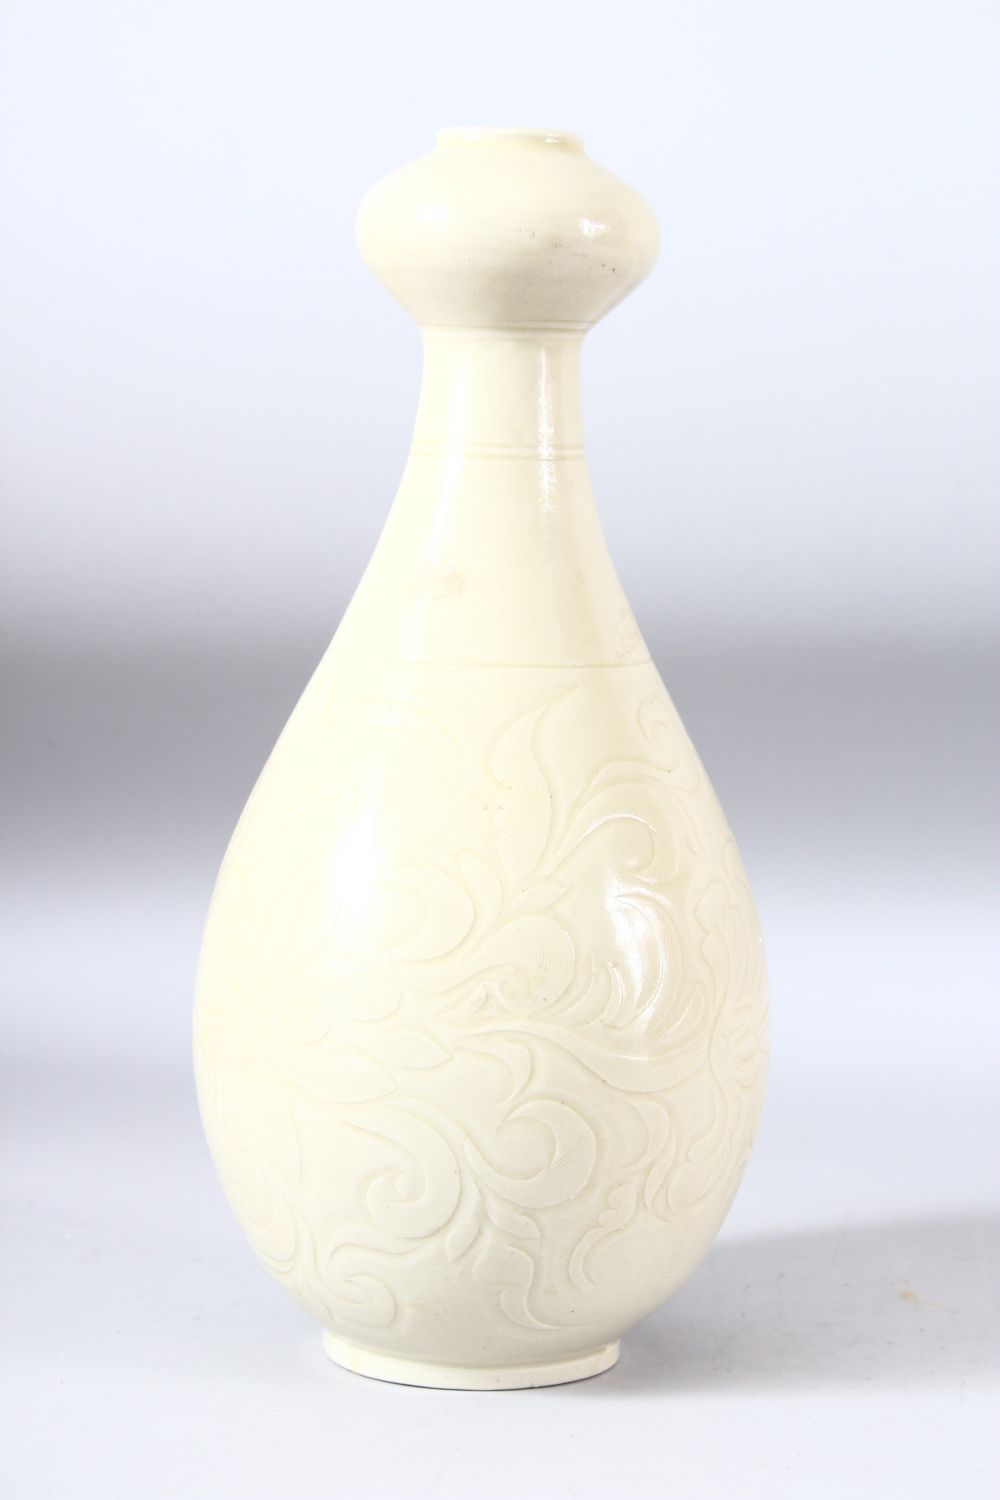 A CHINESE DING STYLE VASE, with carved sgraffito floral sprays to the body, 33cm high. - Image 4 of 6